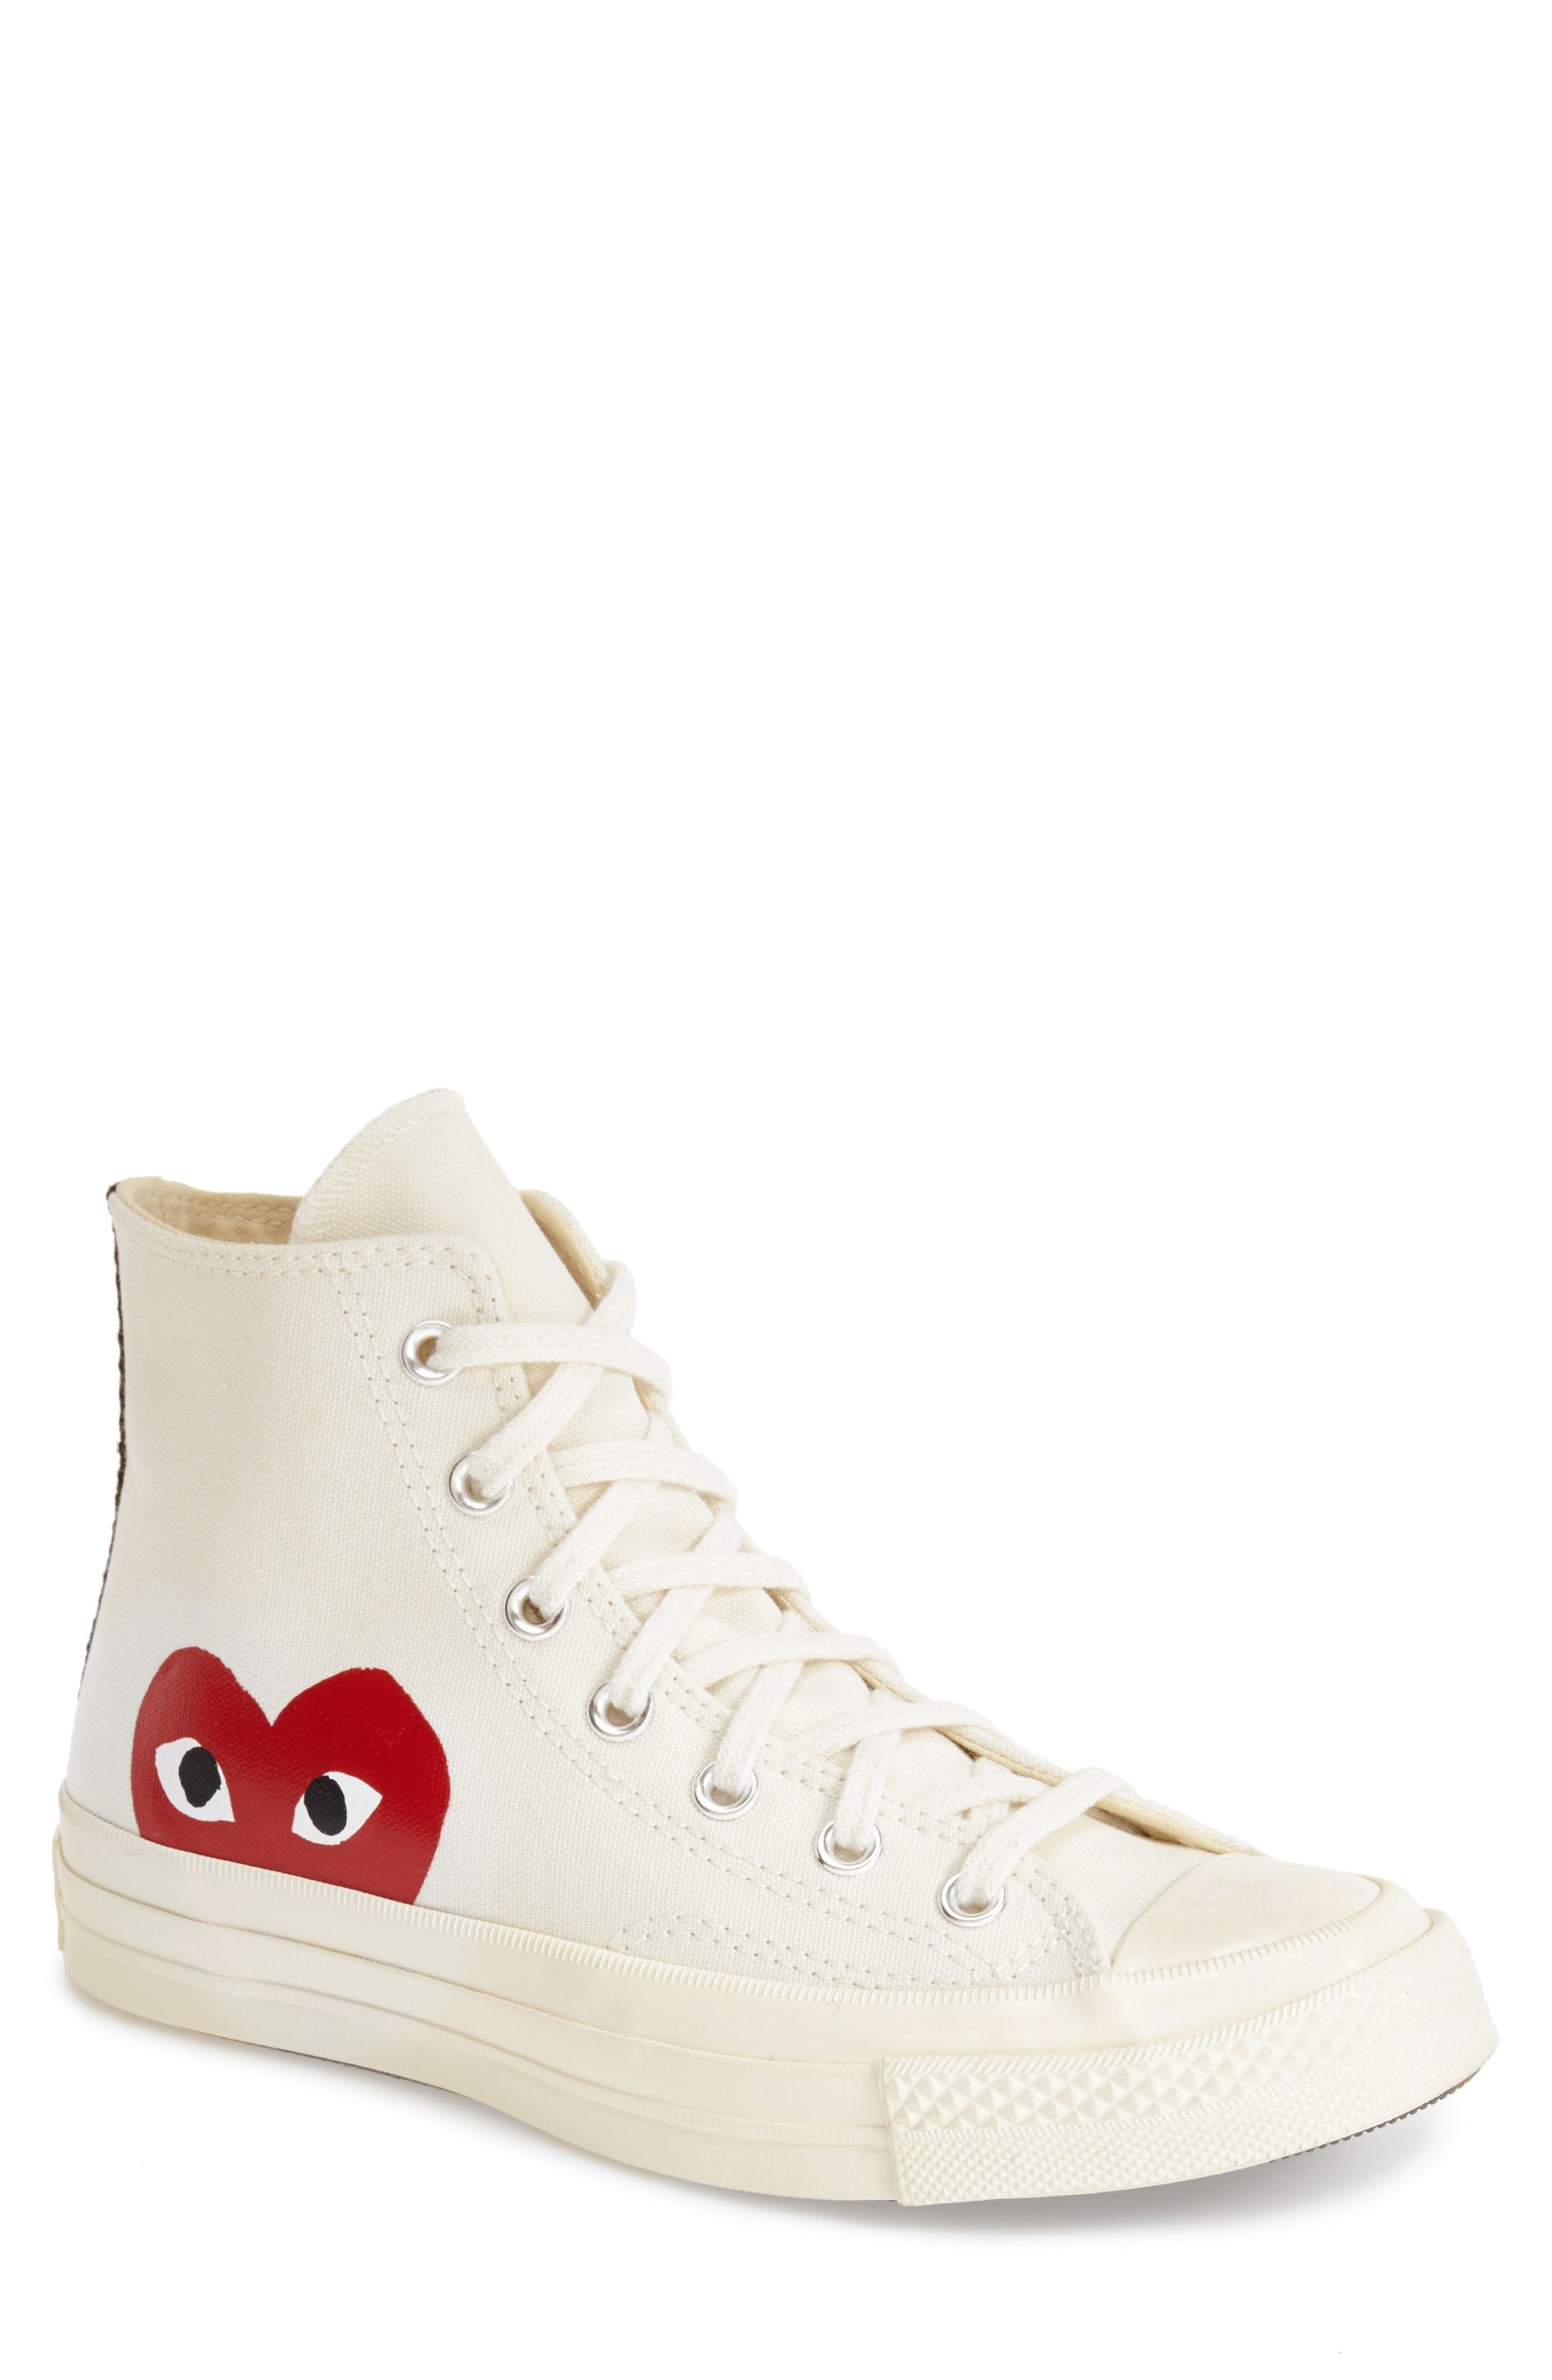 converse chuck taylor red heart